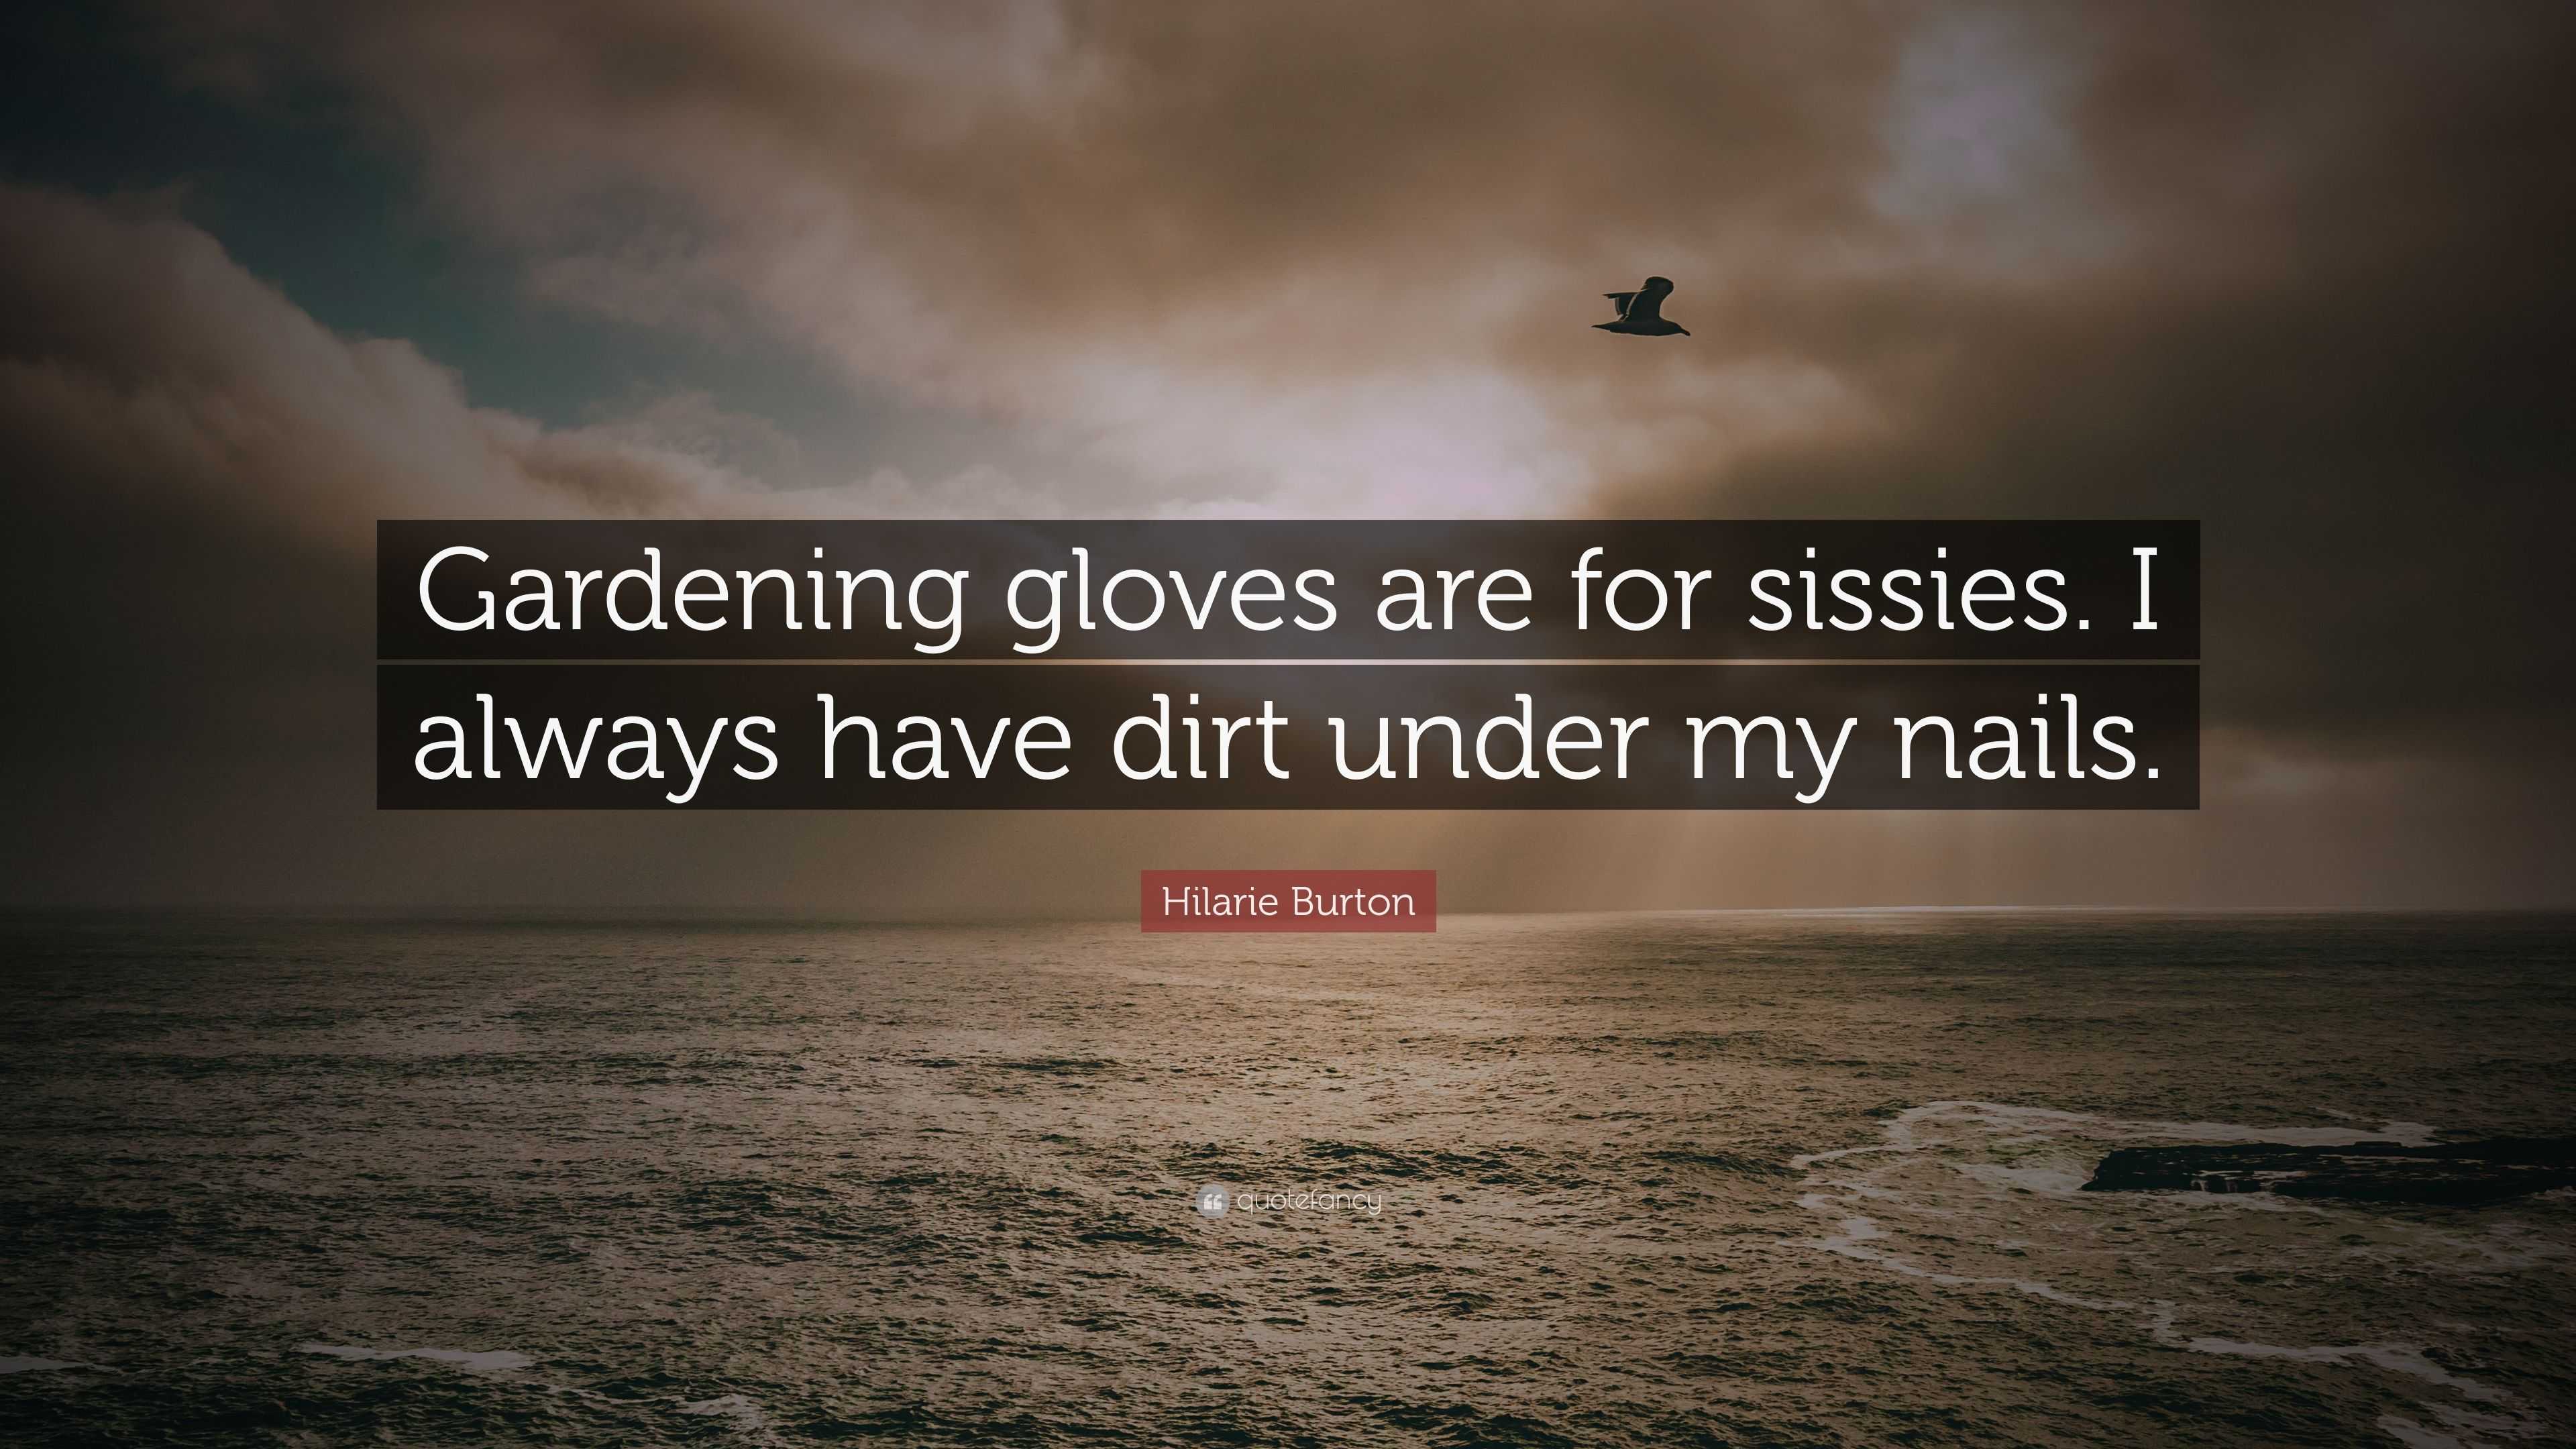 Hilarie Burton Quote: “Gardening gloves are for sissies. I always have dirt  under my nails.”